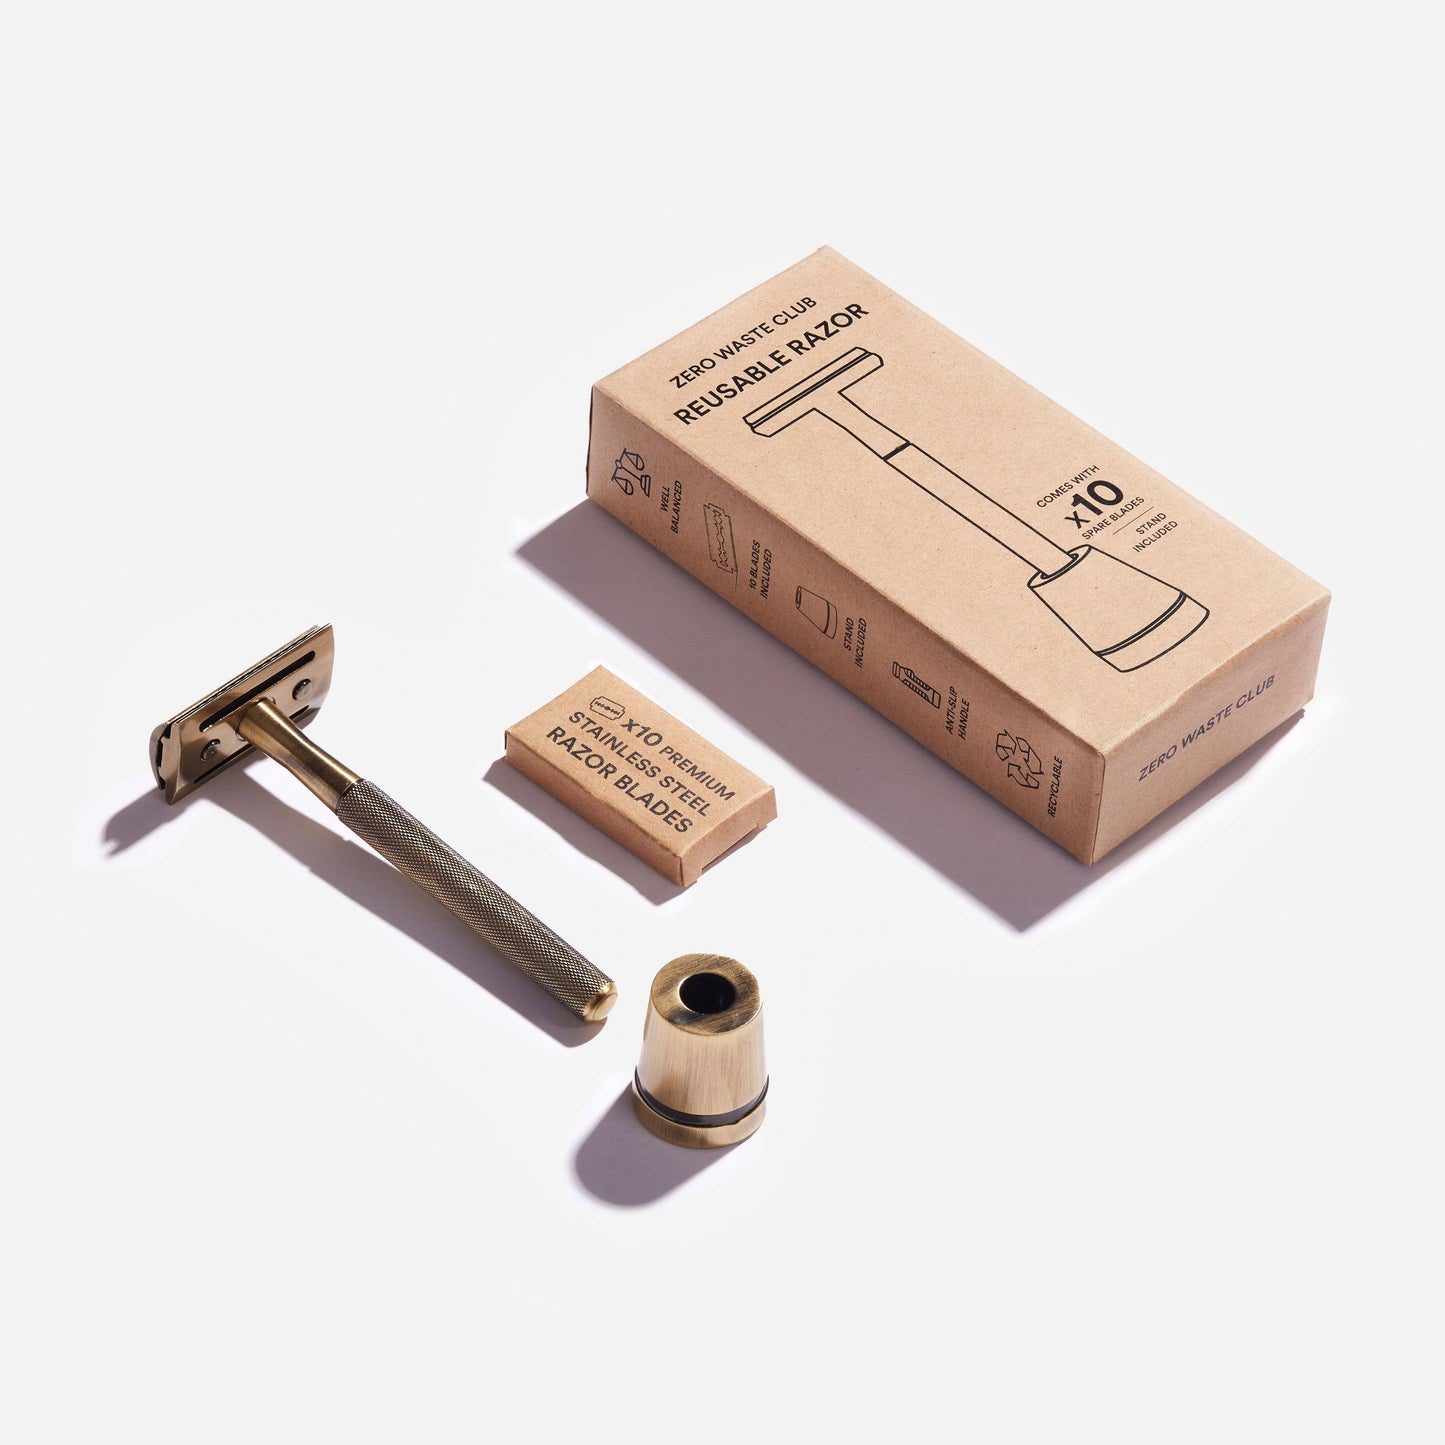 Reusable Safety Razor with Stand - 10 Blades Included: Matte Grey